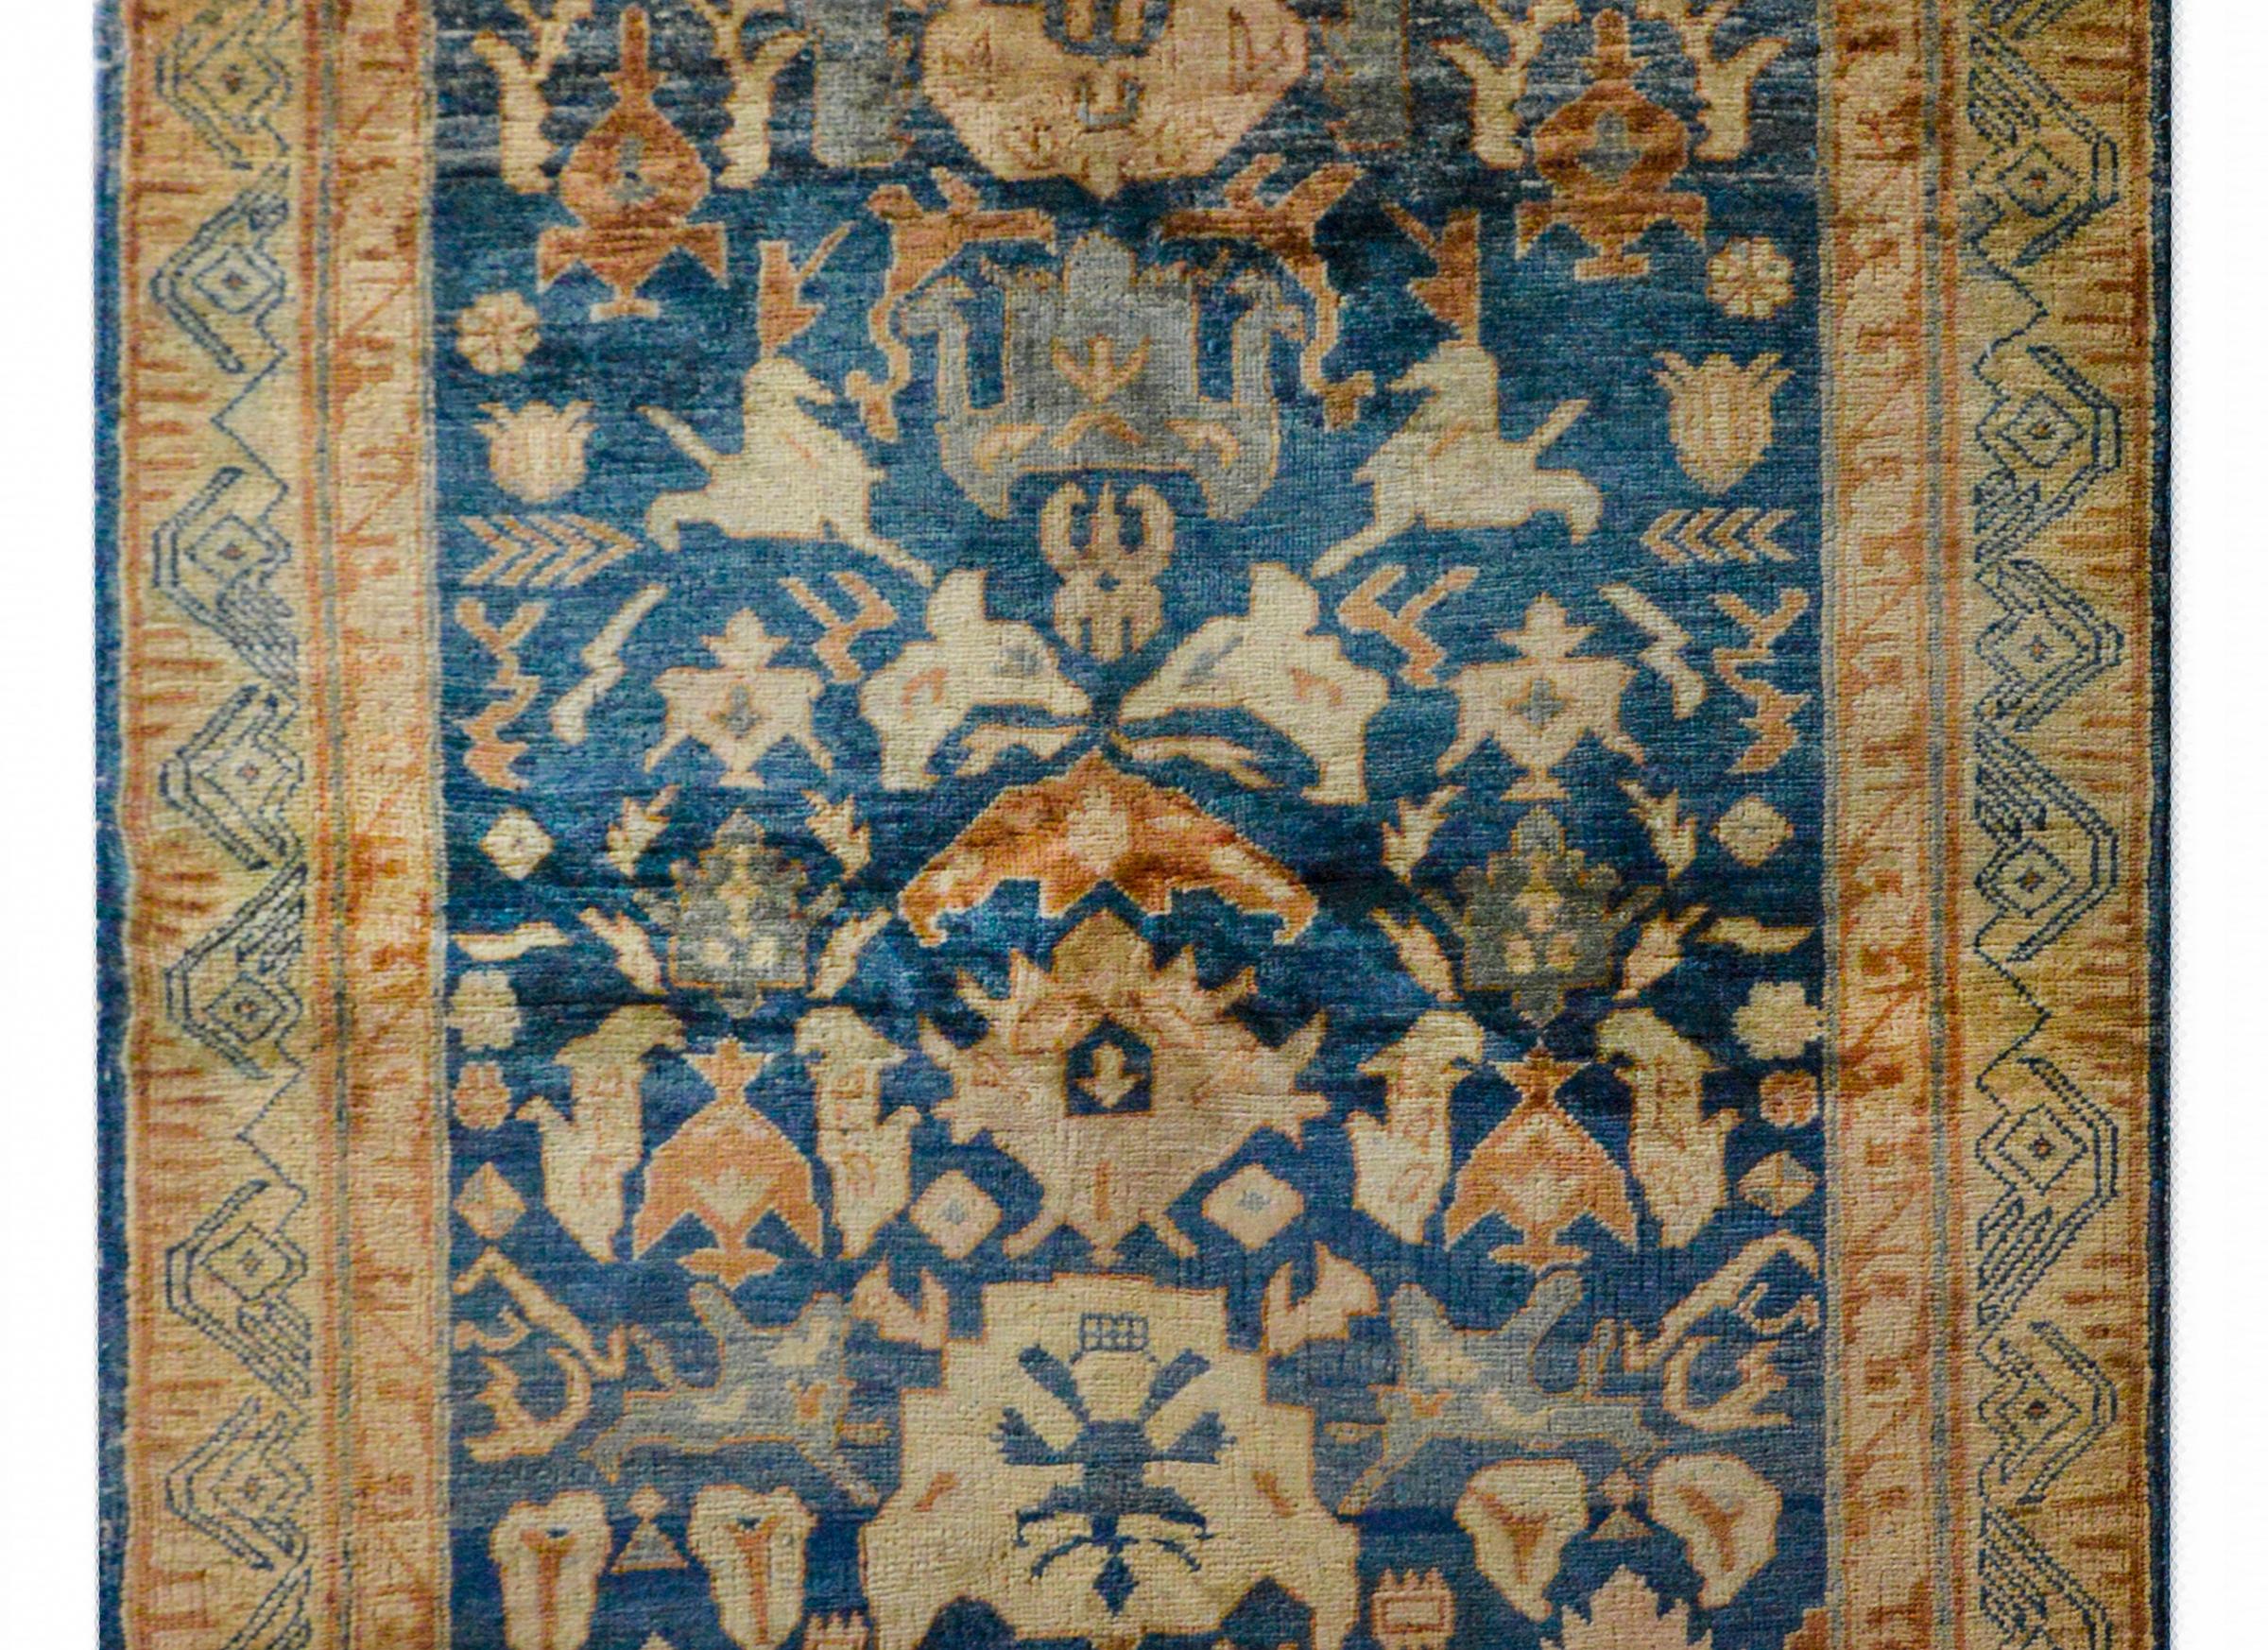 A fantastic bold vintage Anatolian Turkish rug with a strong tribal pattern woven in muted oranges, blues, creams, and reds, all set against a dark indigo background. The border is beautiful with a stylized floral pattern woven with thin linework.